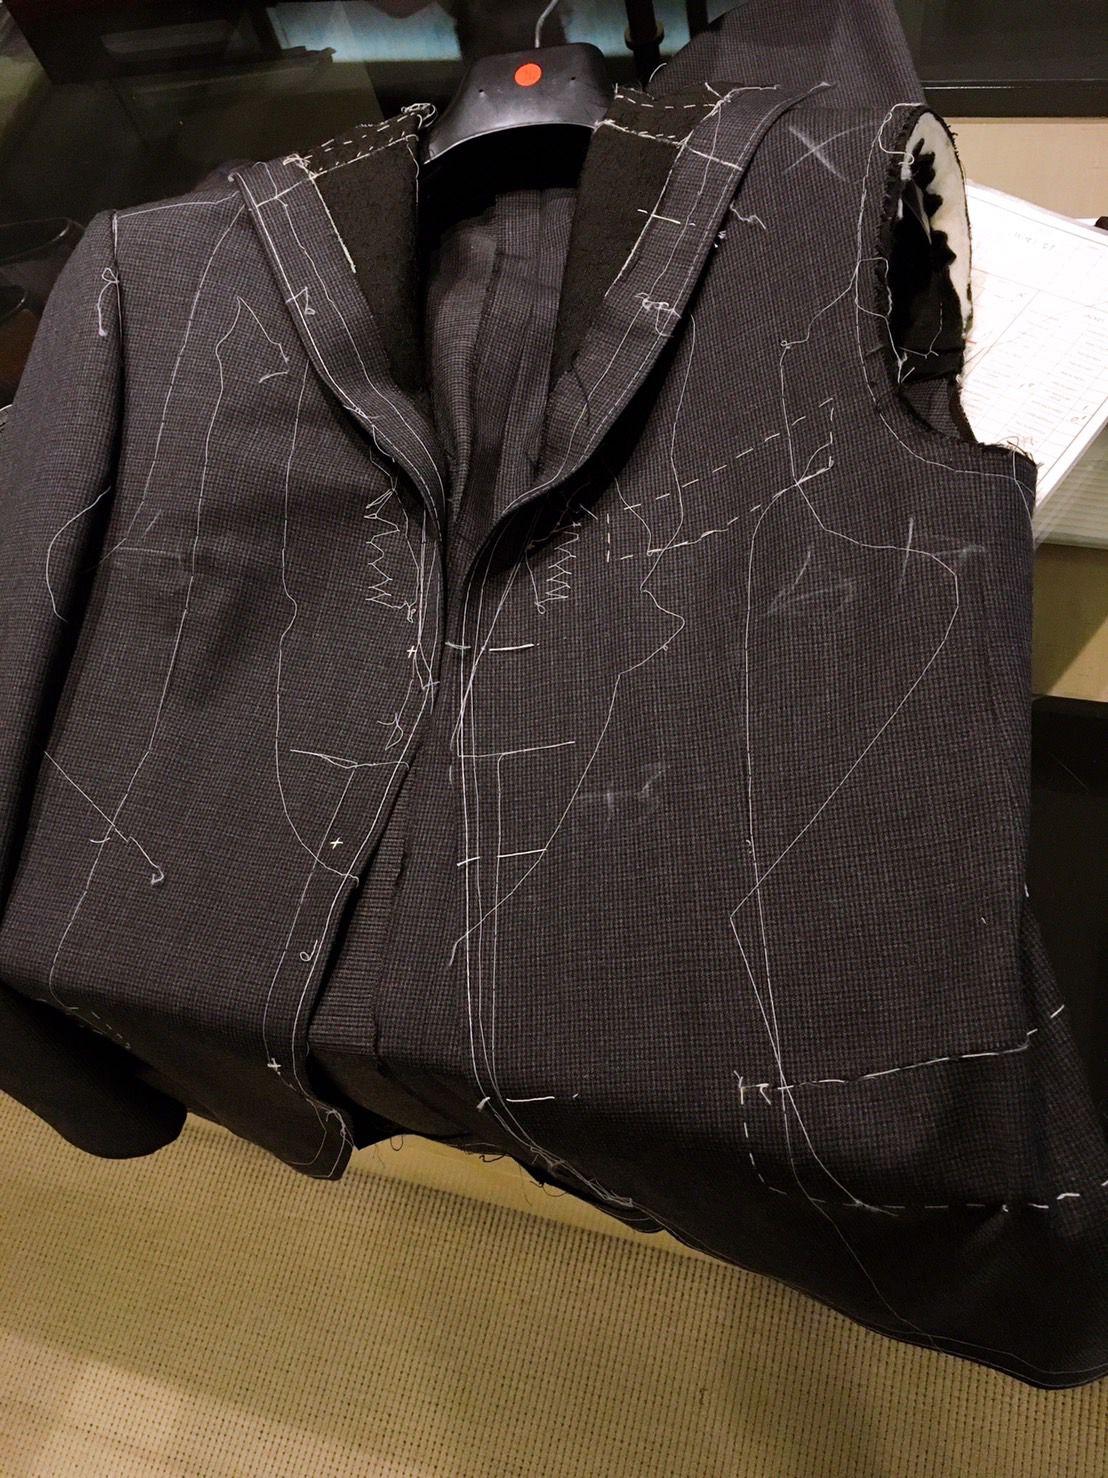 Bespoke Brioni Suit early stages